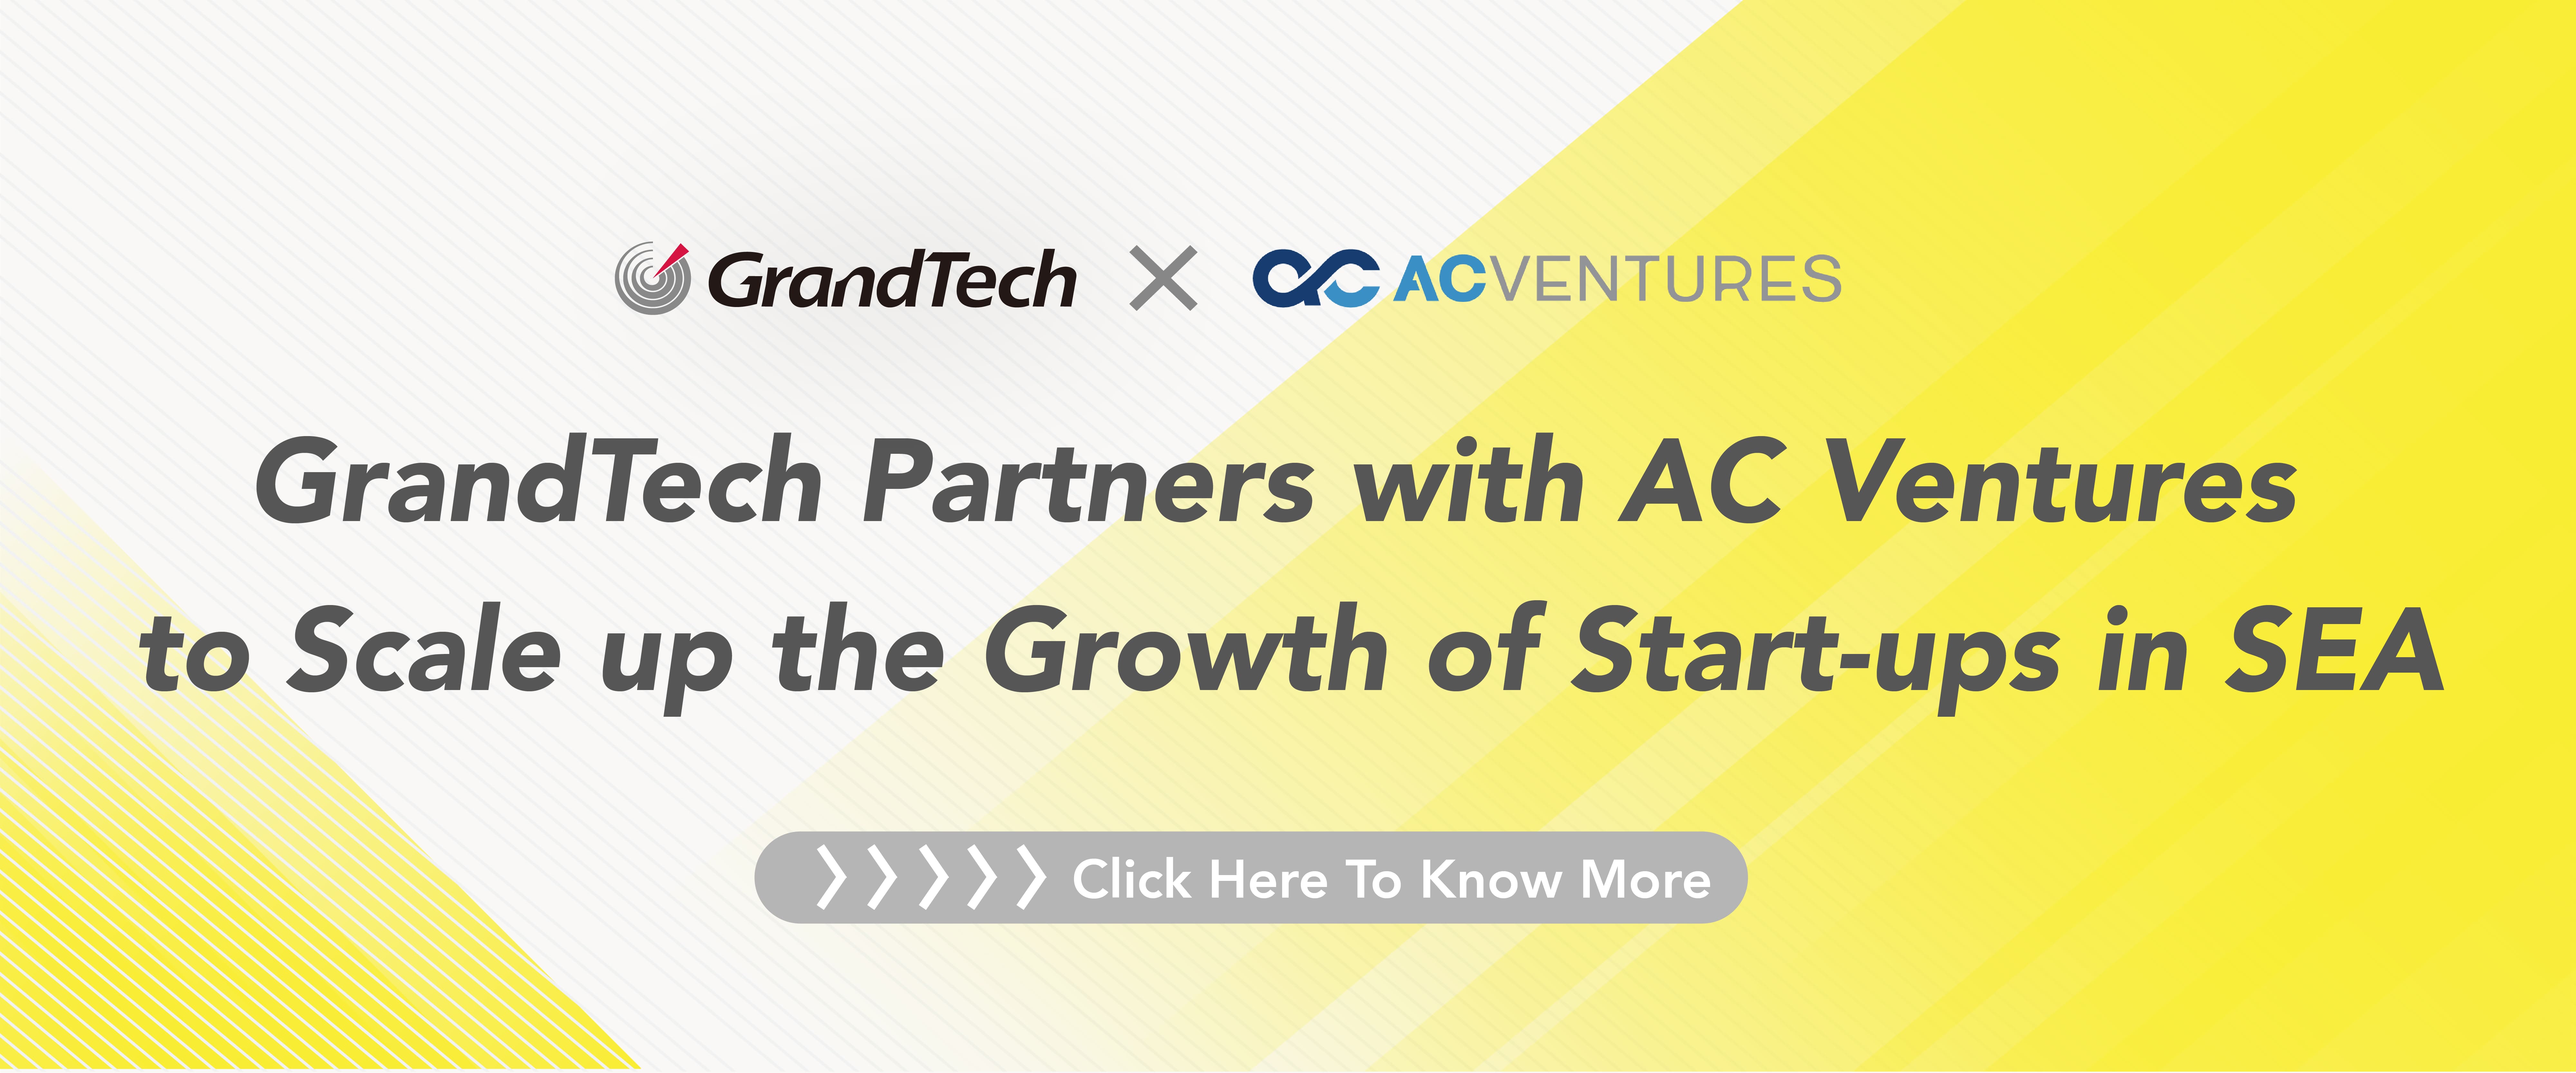 GrandTech Partners with AC Ventures to Scale up the Growth of Start-ups in SEA